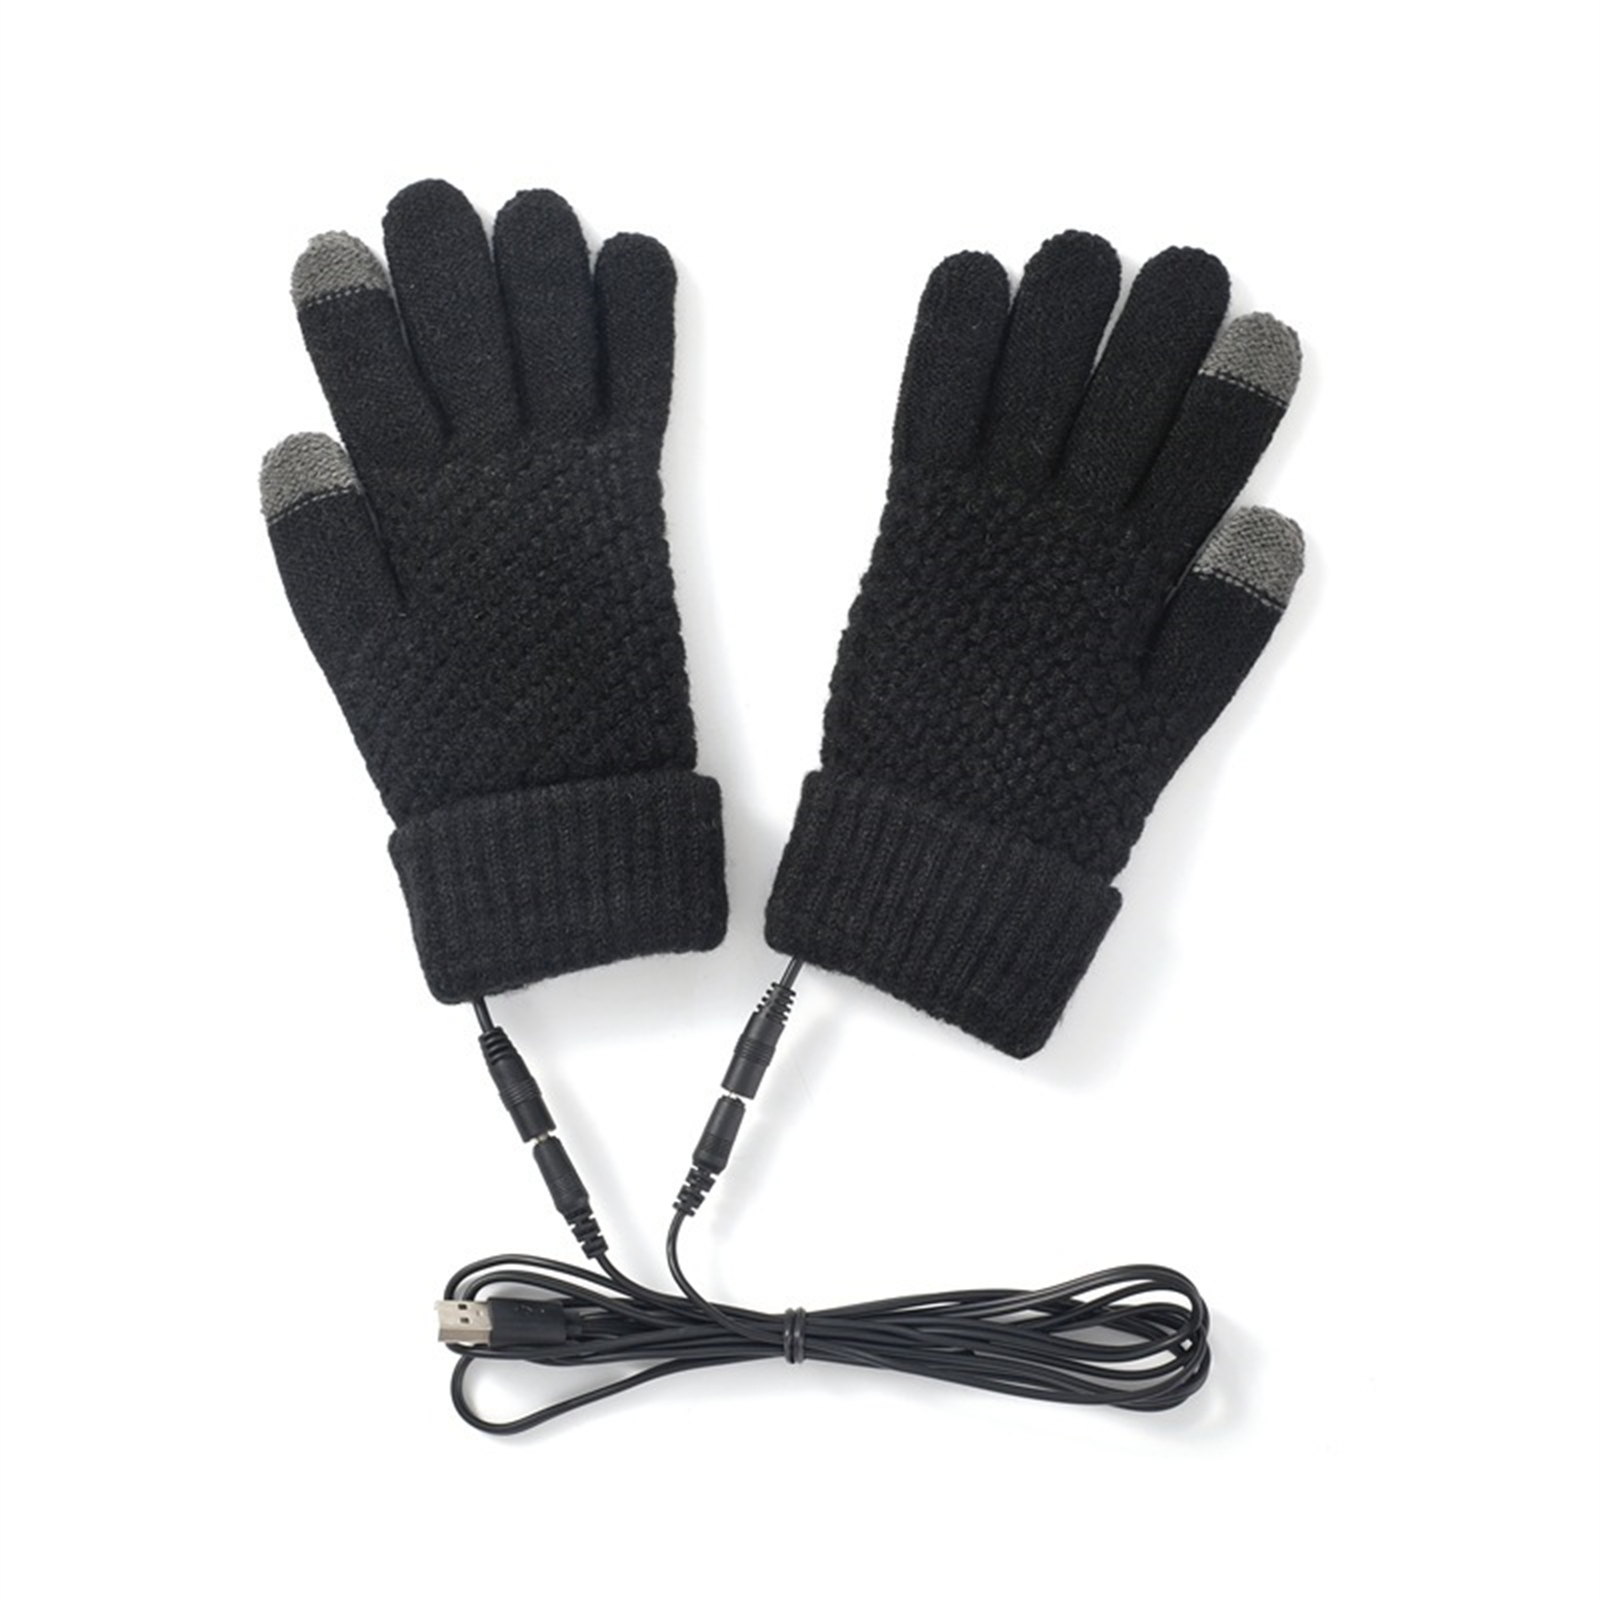 1 Pair Heated Gloves Built In Heating Sheet 5V 1A USB Powered Winter Thermal Warm Gloves With Touch Screen Function For Men Women